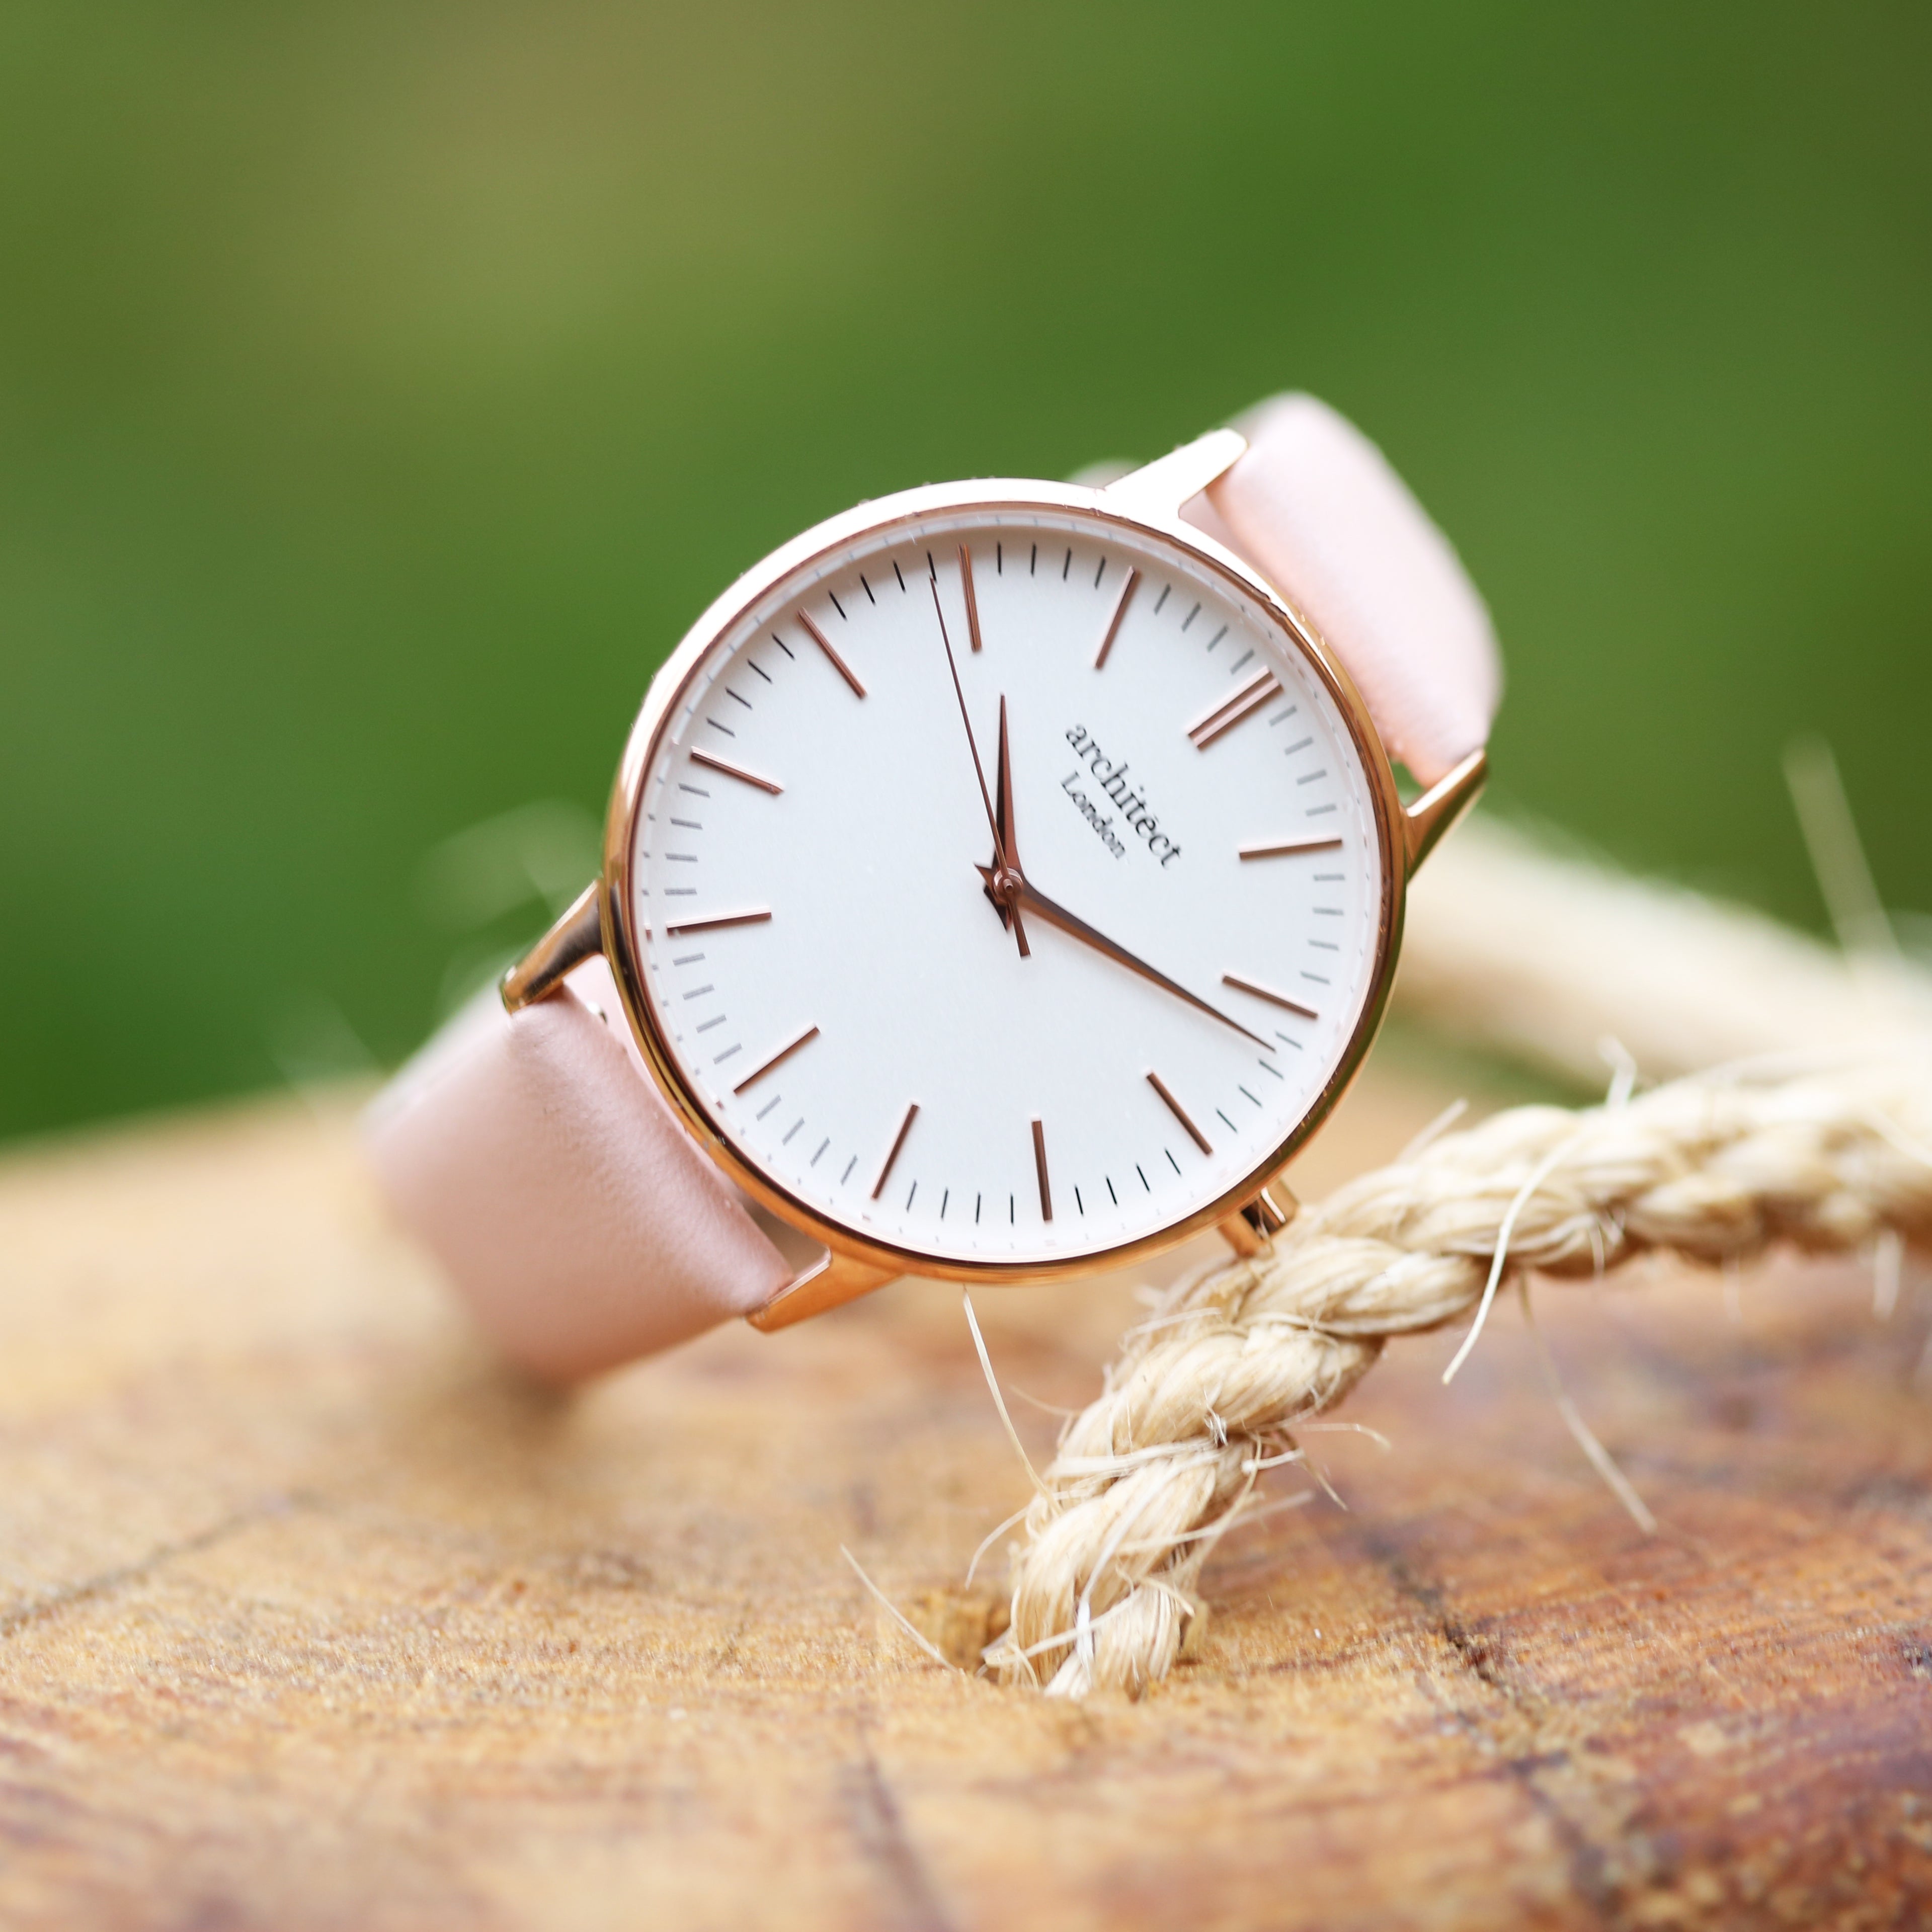 Contactless Payment Watch - Ladies Architēct Blanc + Light Pink Strap + Own Handwriting Engraving